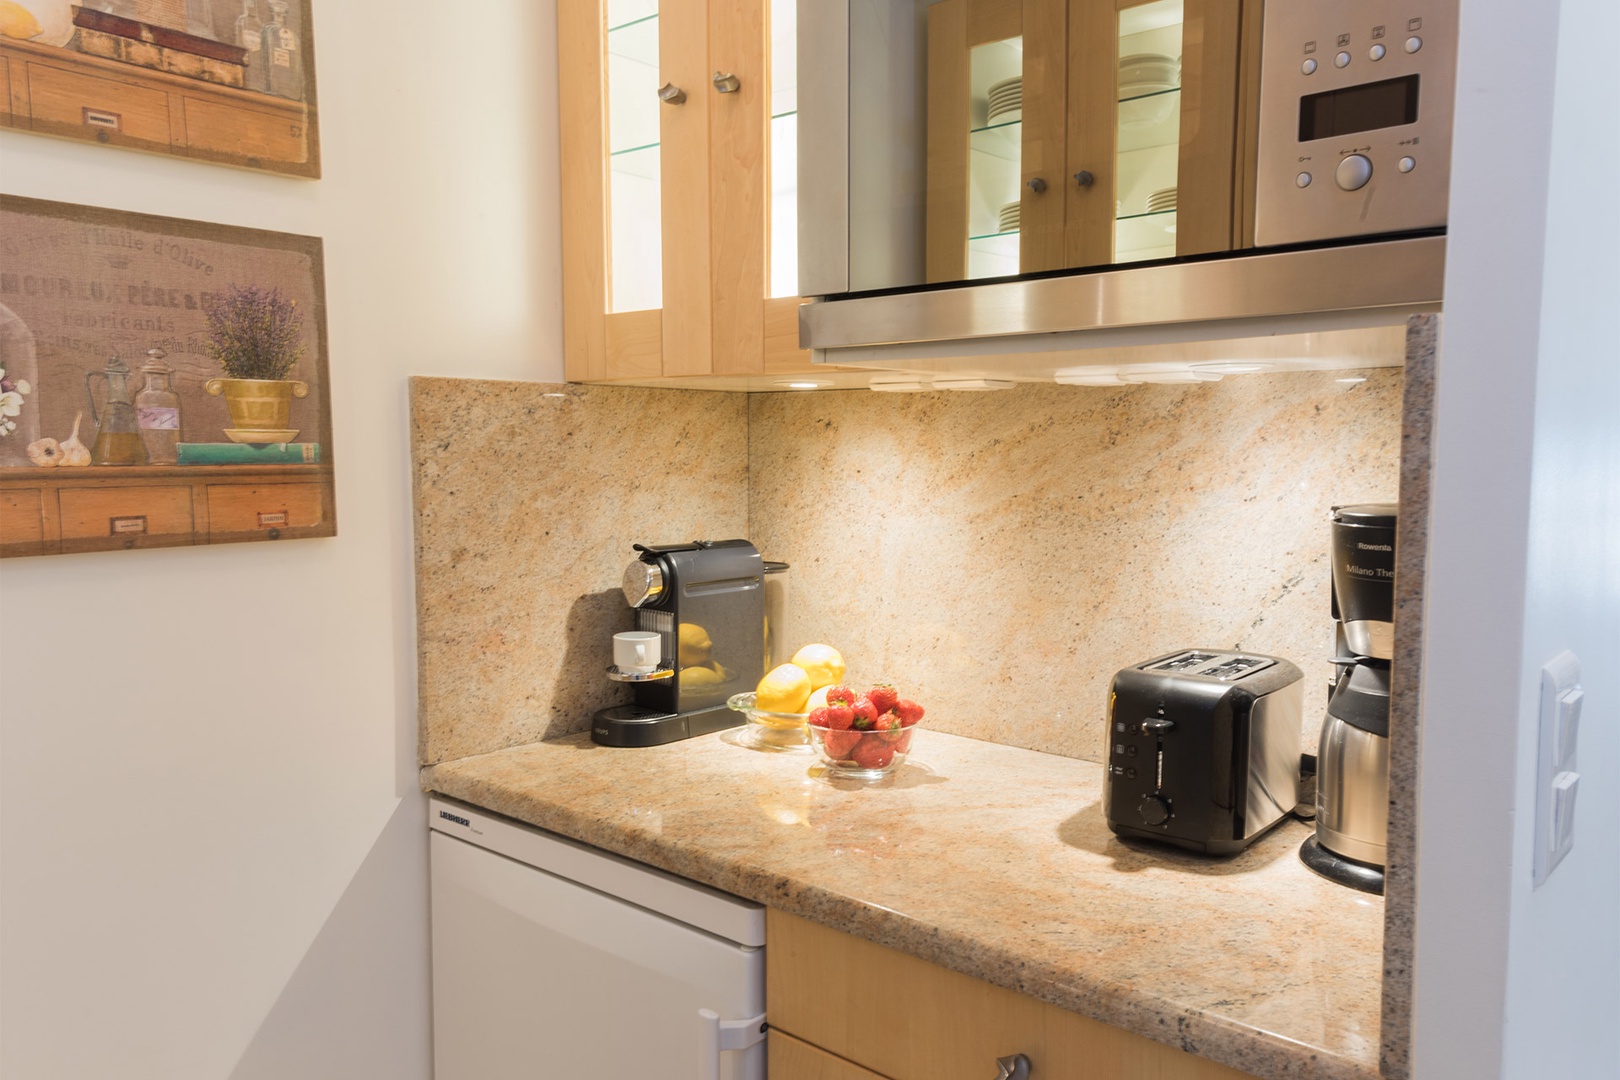 The kitchen is fully equipped, so you can prepare gourmet meals.